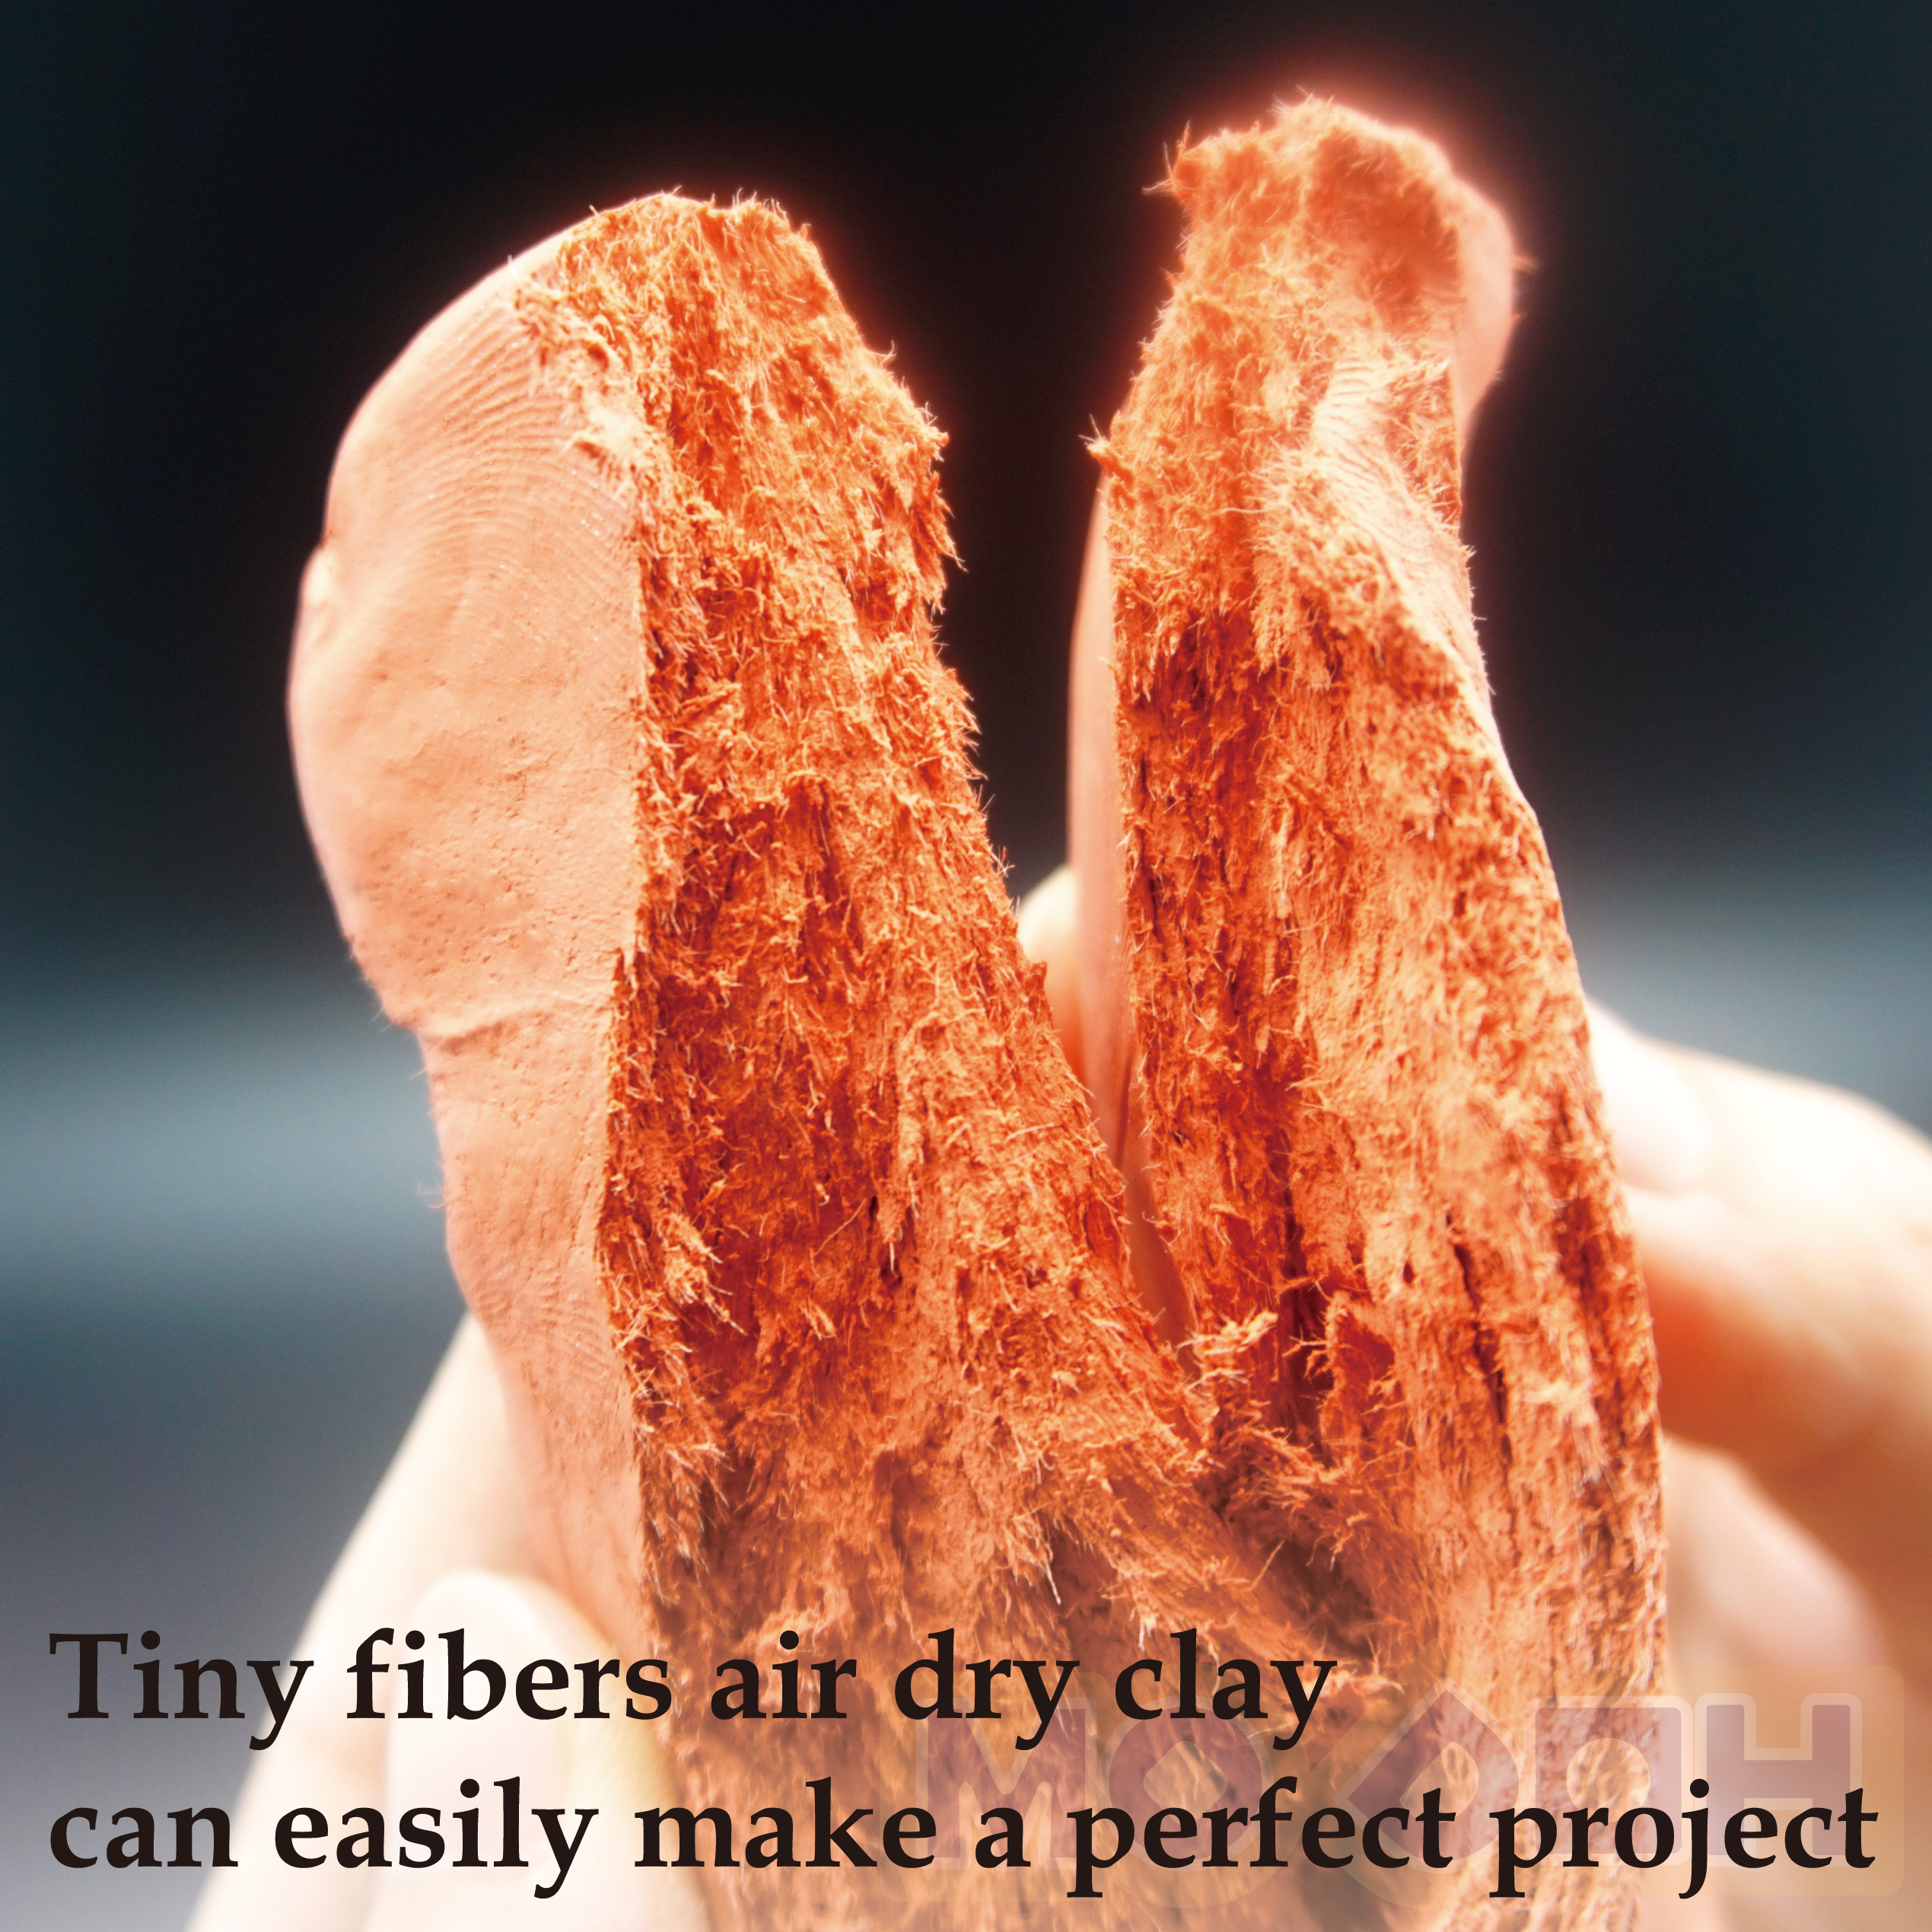 Tiny fibers air dry clay can easily make a perfect project